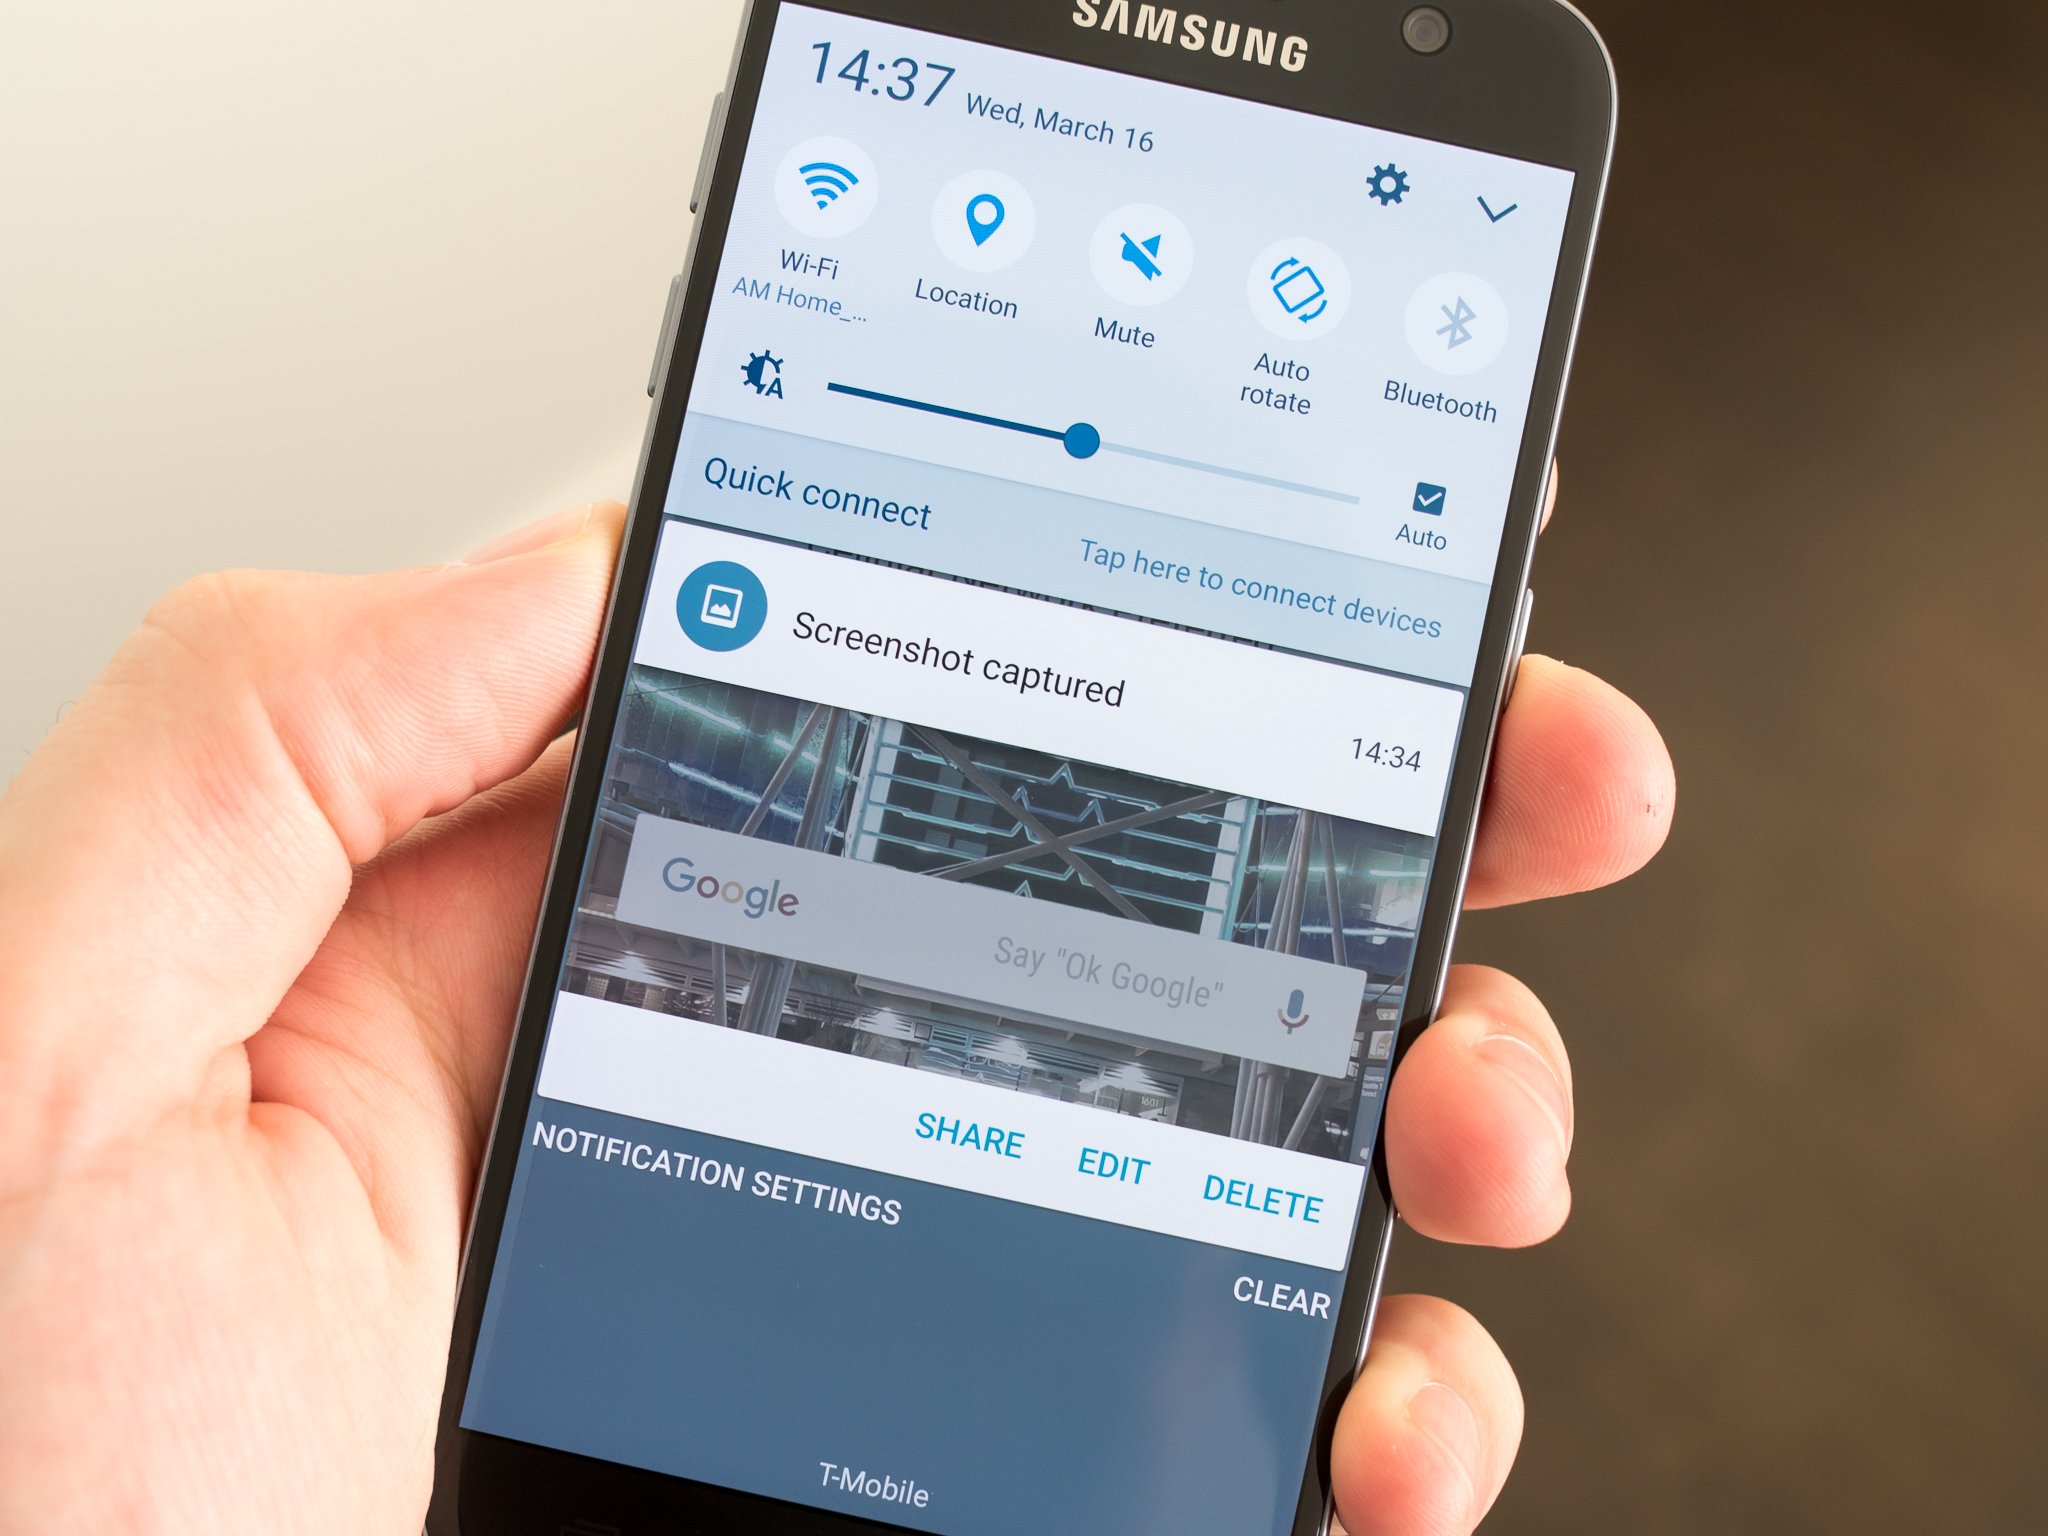 How to take a screenshot on the Samsung Galaxy S7 | Android Central